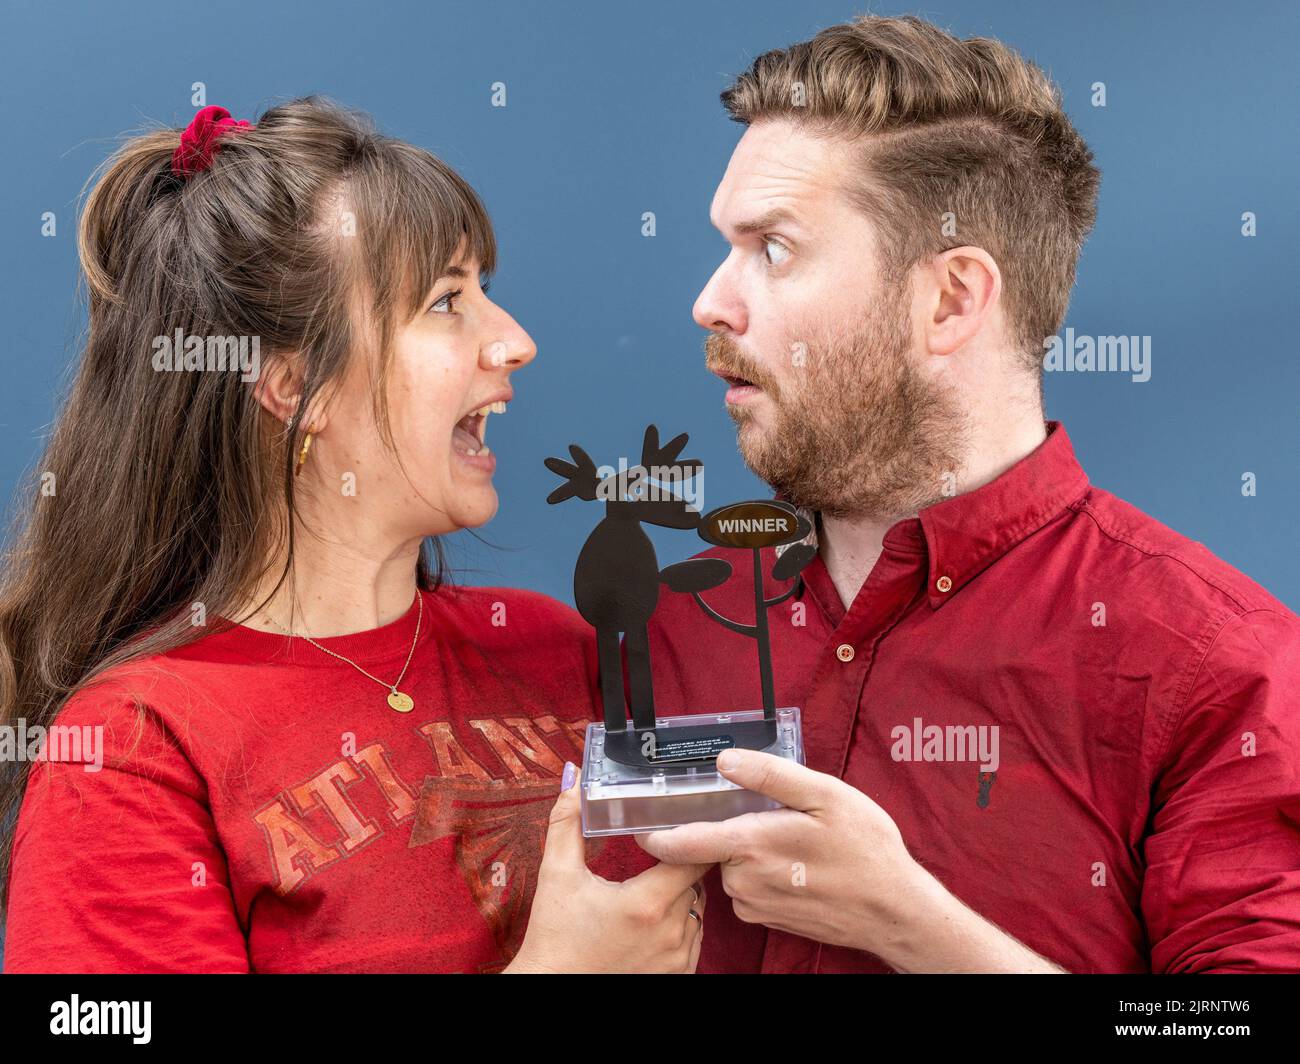 Edinburgh, United Kingdom. 21 August, 2022 Pictured: Grubby Little Mitts winners of the Amused Moose Comedy Awards Top Sketch Show. Photograph taken for Amused Moose Comedy Awards. Credit: Rich Dyson Stock Photo